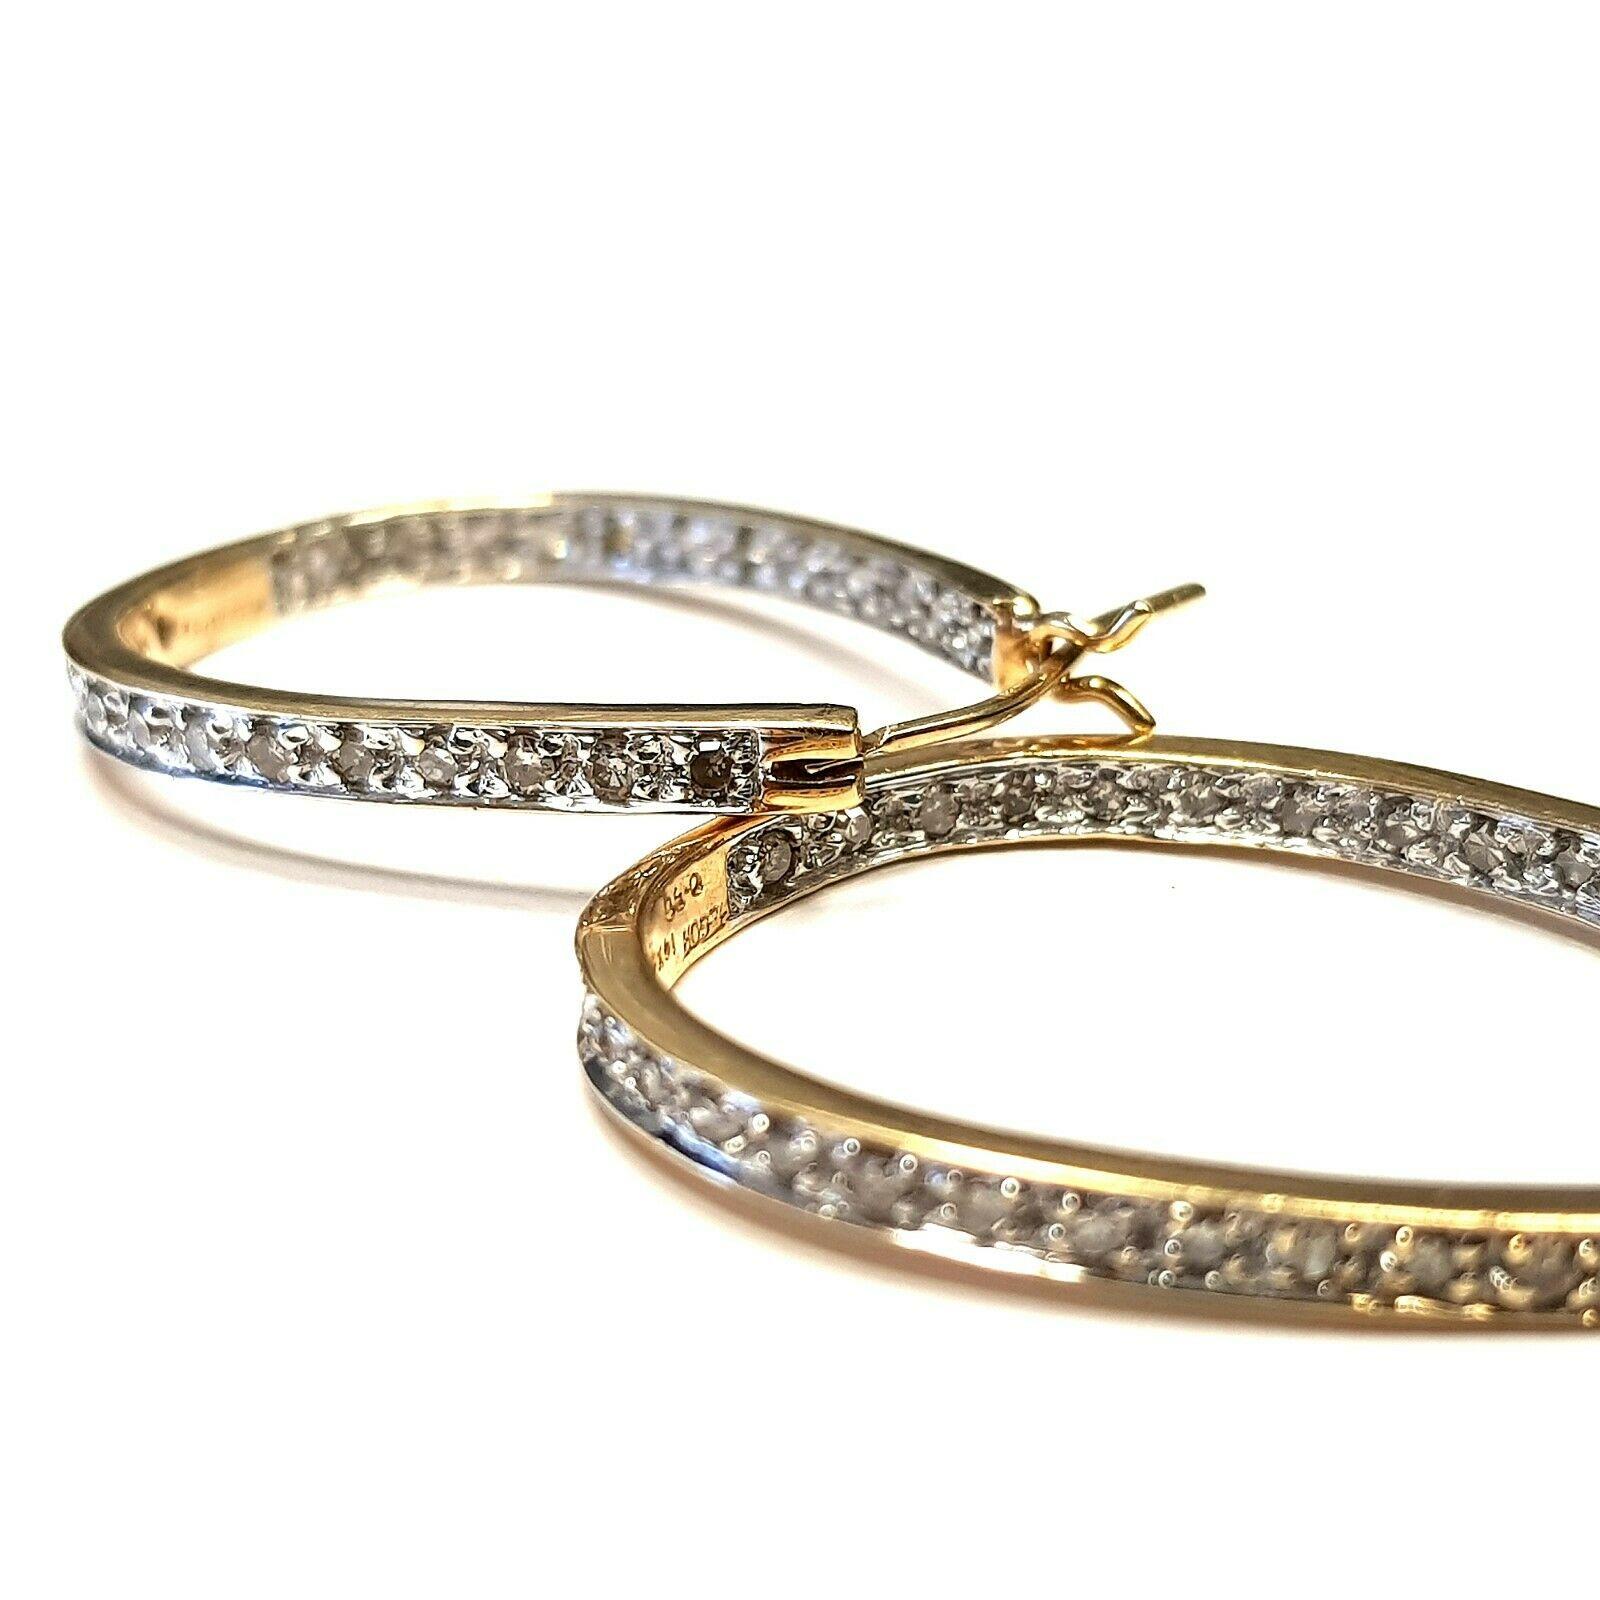  14k Yellow Gold Horseshoe Hoop Earrings With Natural Diamonds  
Pre-Owned
Main Stone:   diamonds
Appr. 52 stones 1.00Cttw 
Shape:  Round 
Total Carat Weight:   1.00Cttw
Color:    H
Clarity:    SI2 
Jewelry Specifications
Metal: 14k Yellow Gold Gold